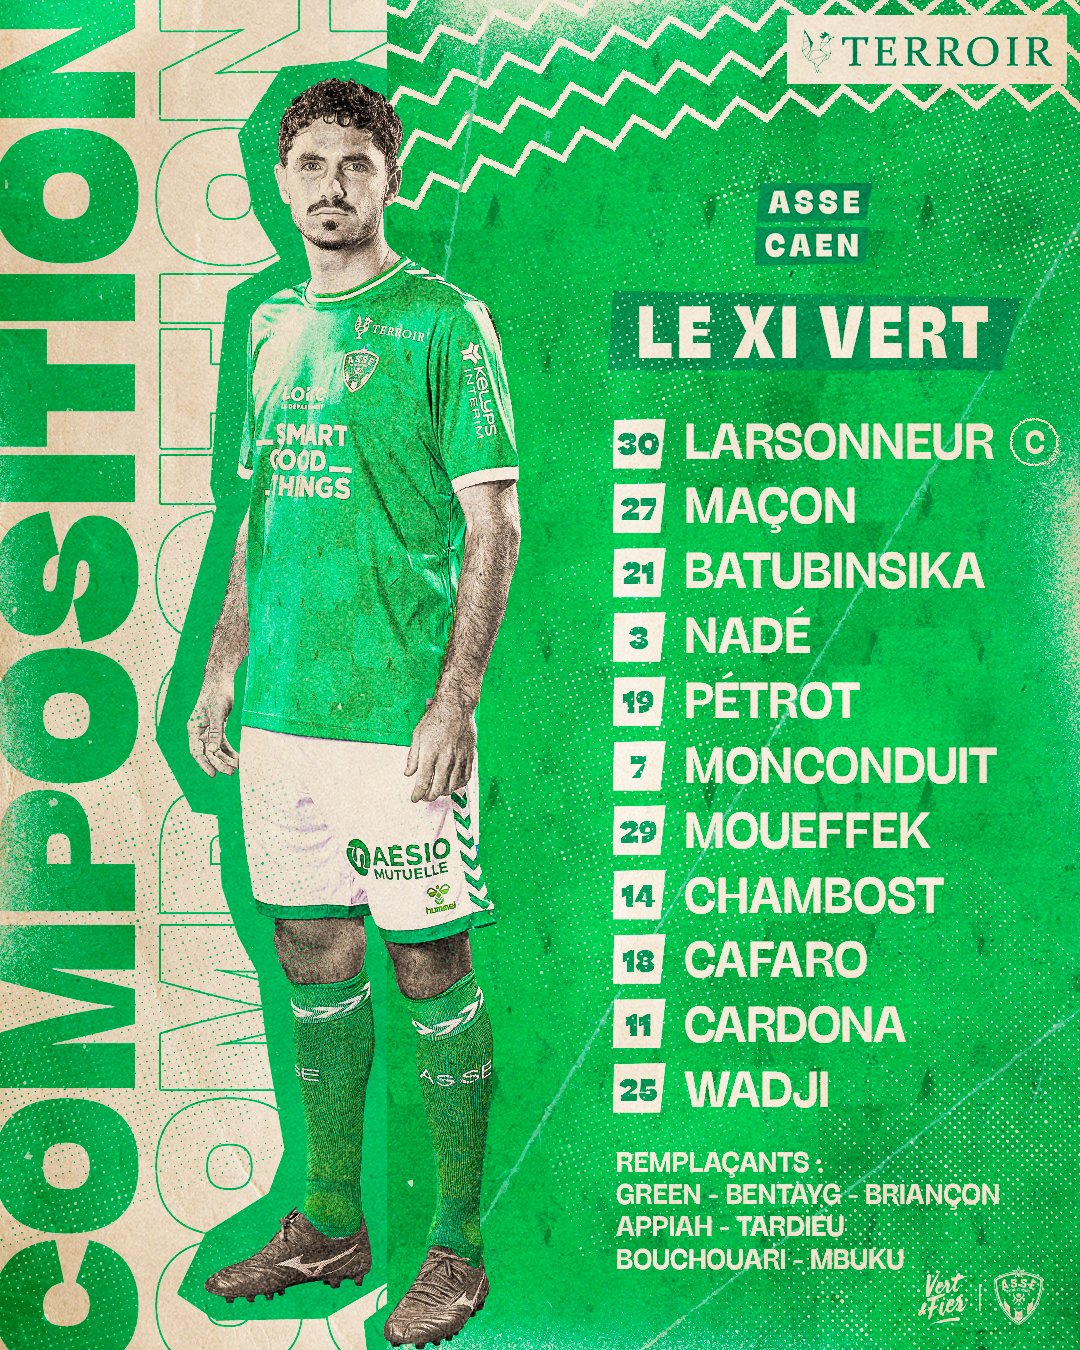 ASSE- CAEN - Page 2 GMK2LREW0AAAVZ9?format=jpg&name=large